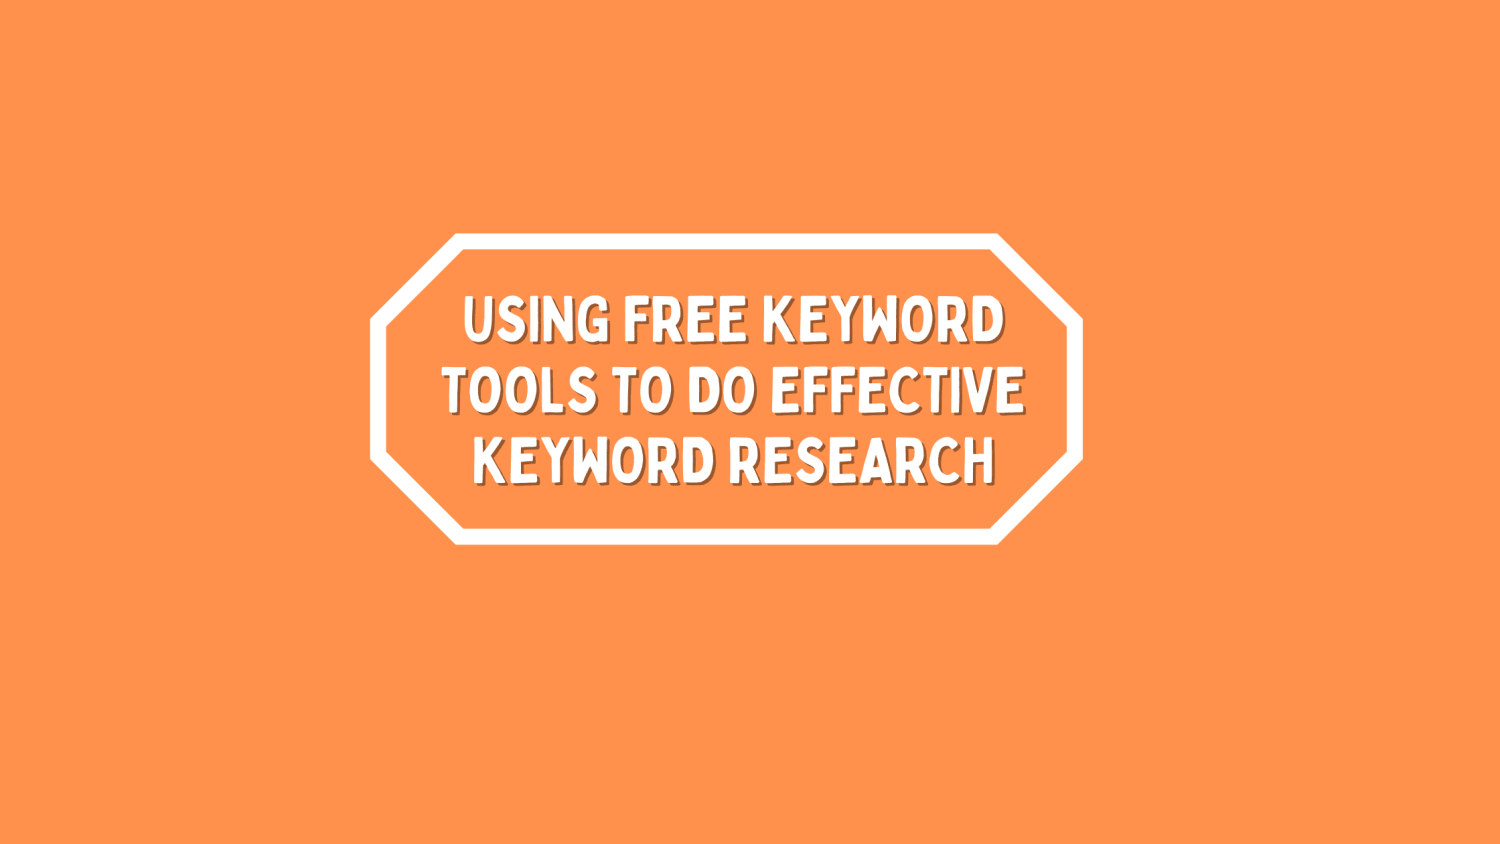 Using Free Keyword Tools to Do Effective Keyword Research